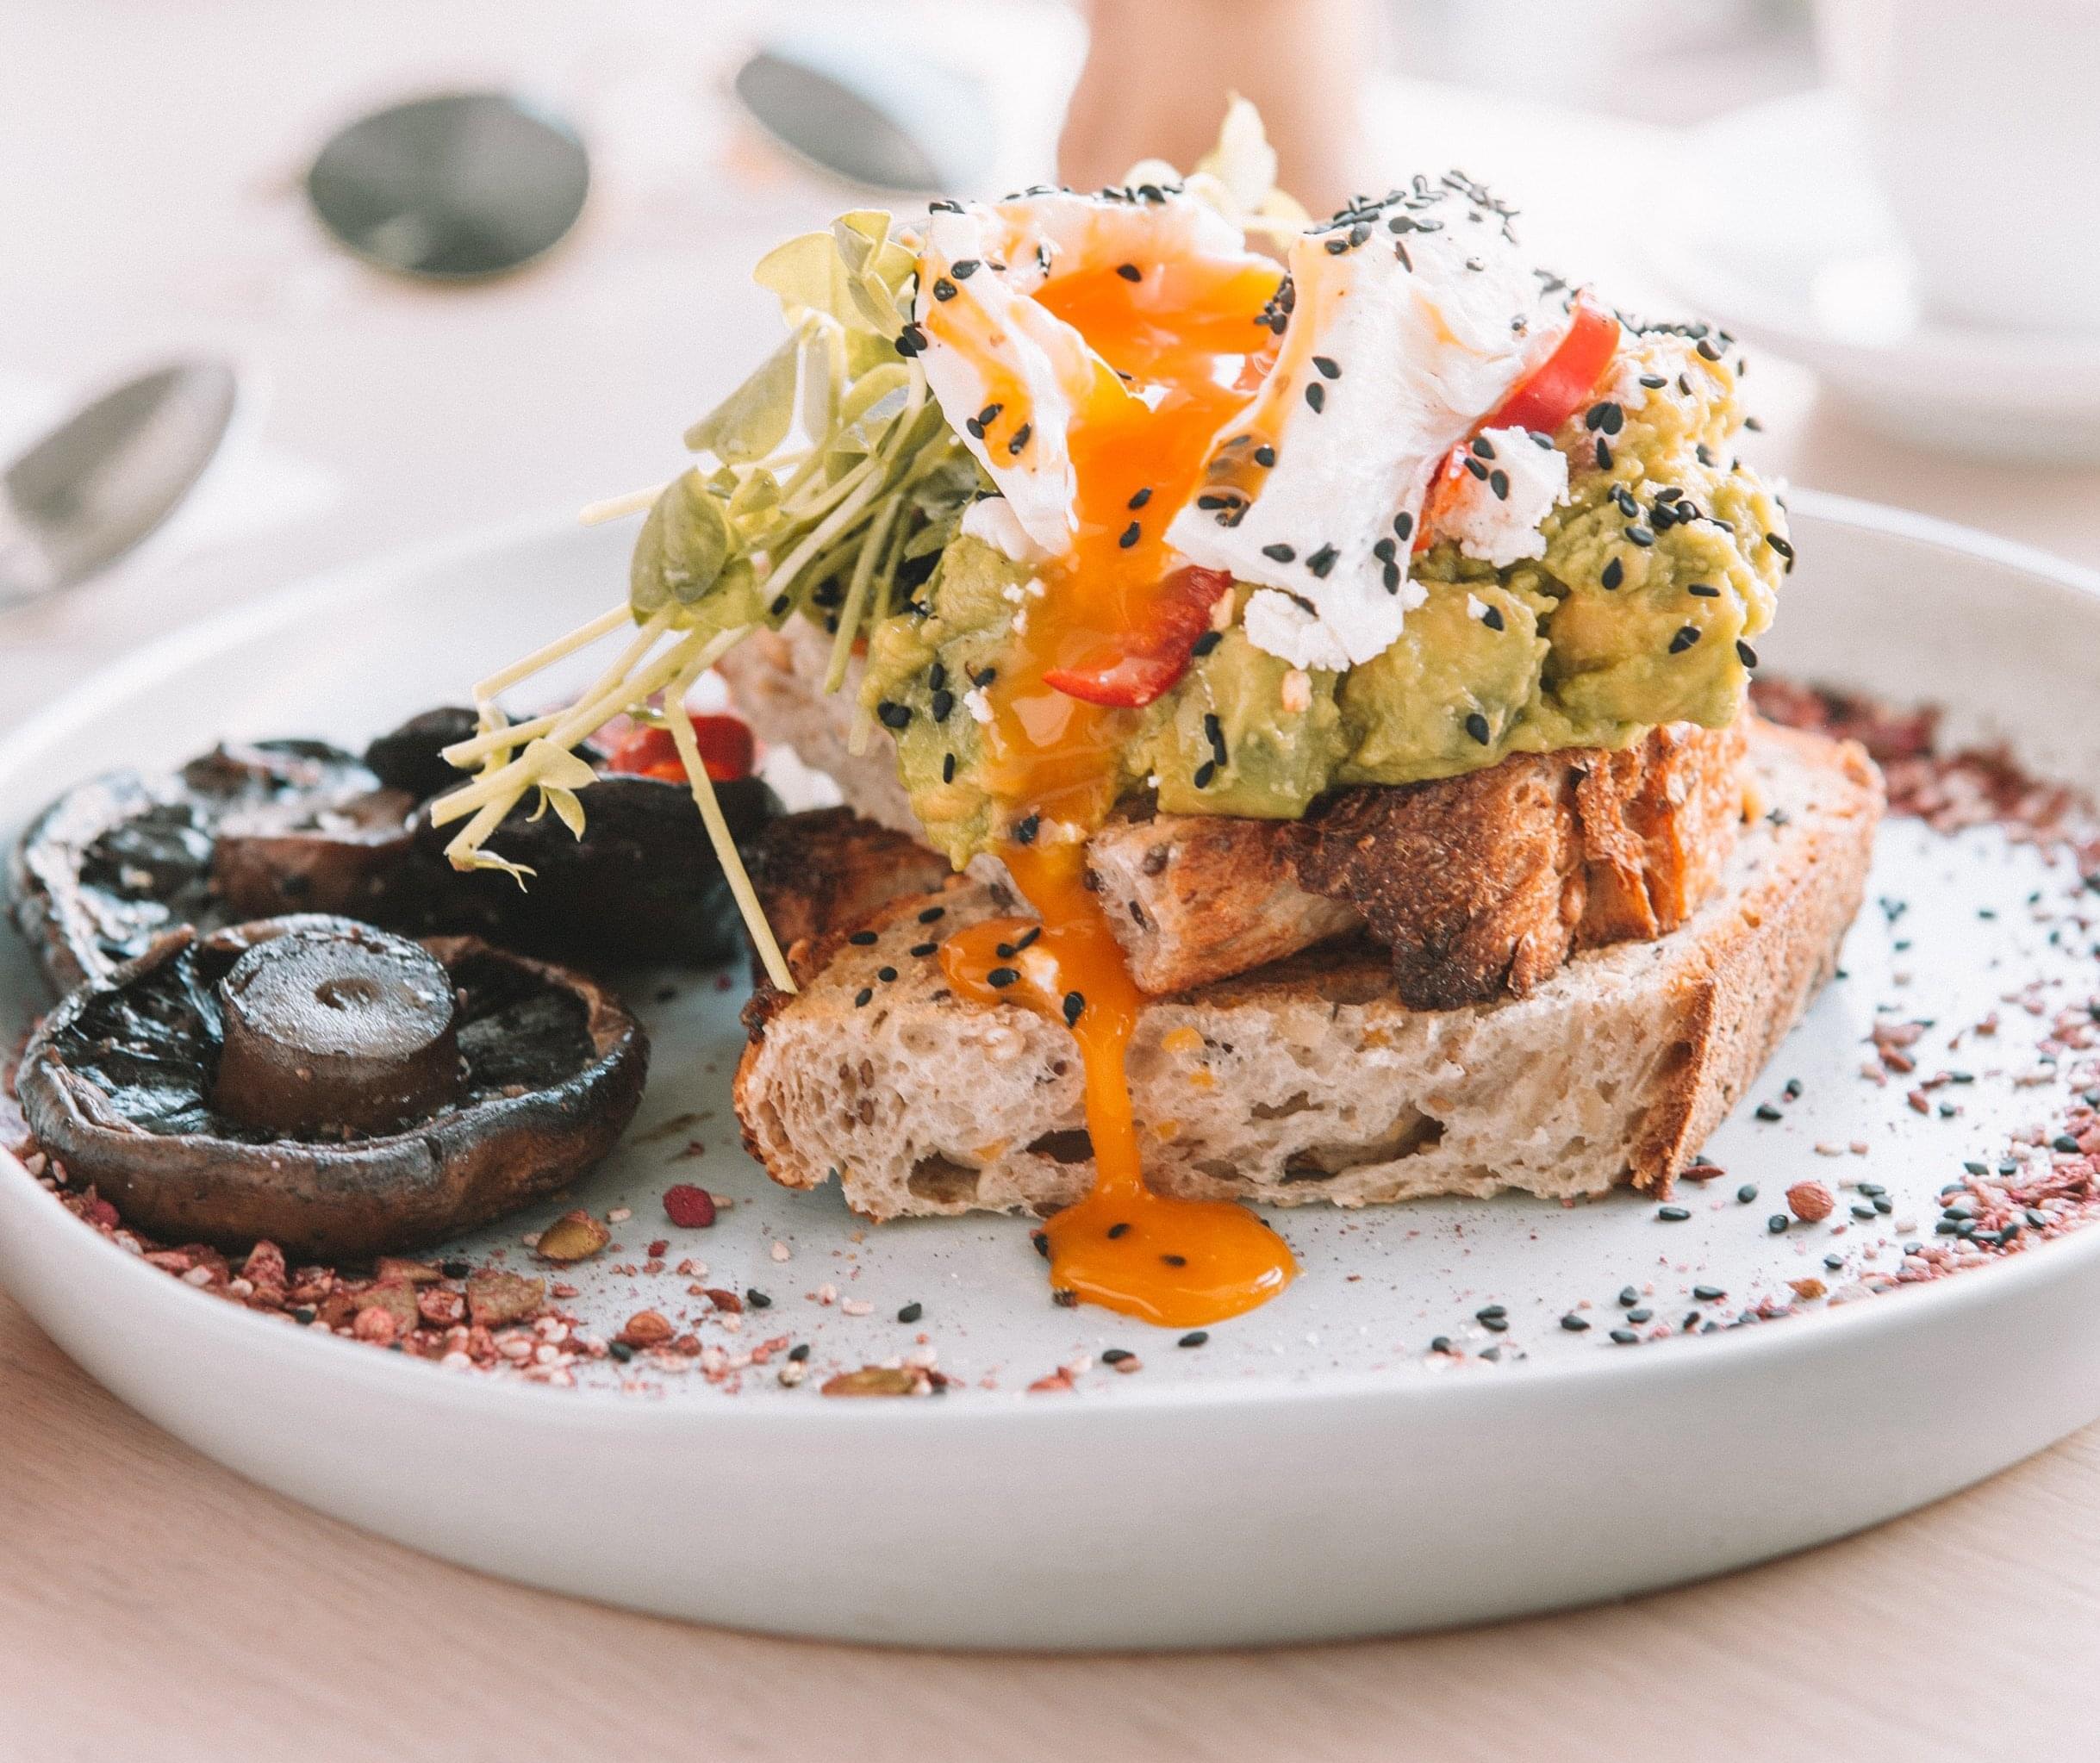 A brunch plate featuring egg, avocado, chia seats, and sprouts on toast with mushrooms on the side